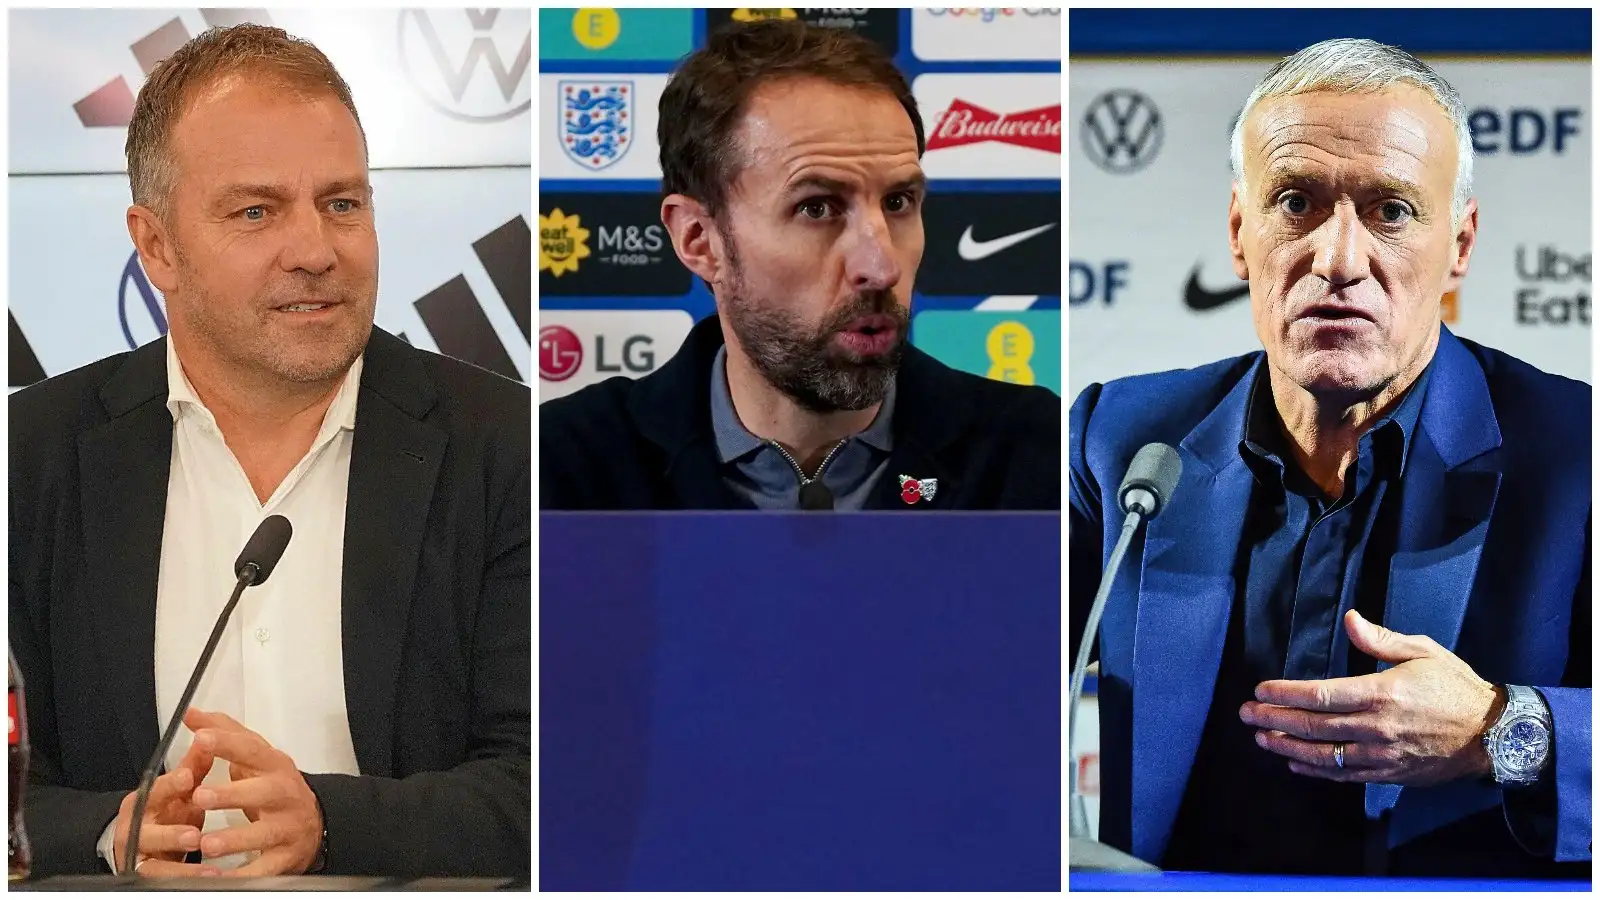 Hansi Flick, Gareth Southgate and Didier Deschamps announce their squads for the World Cup.